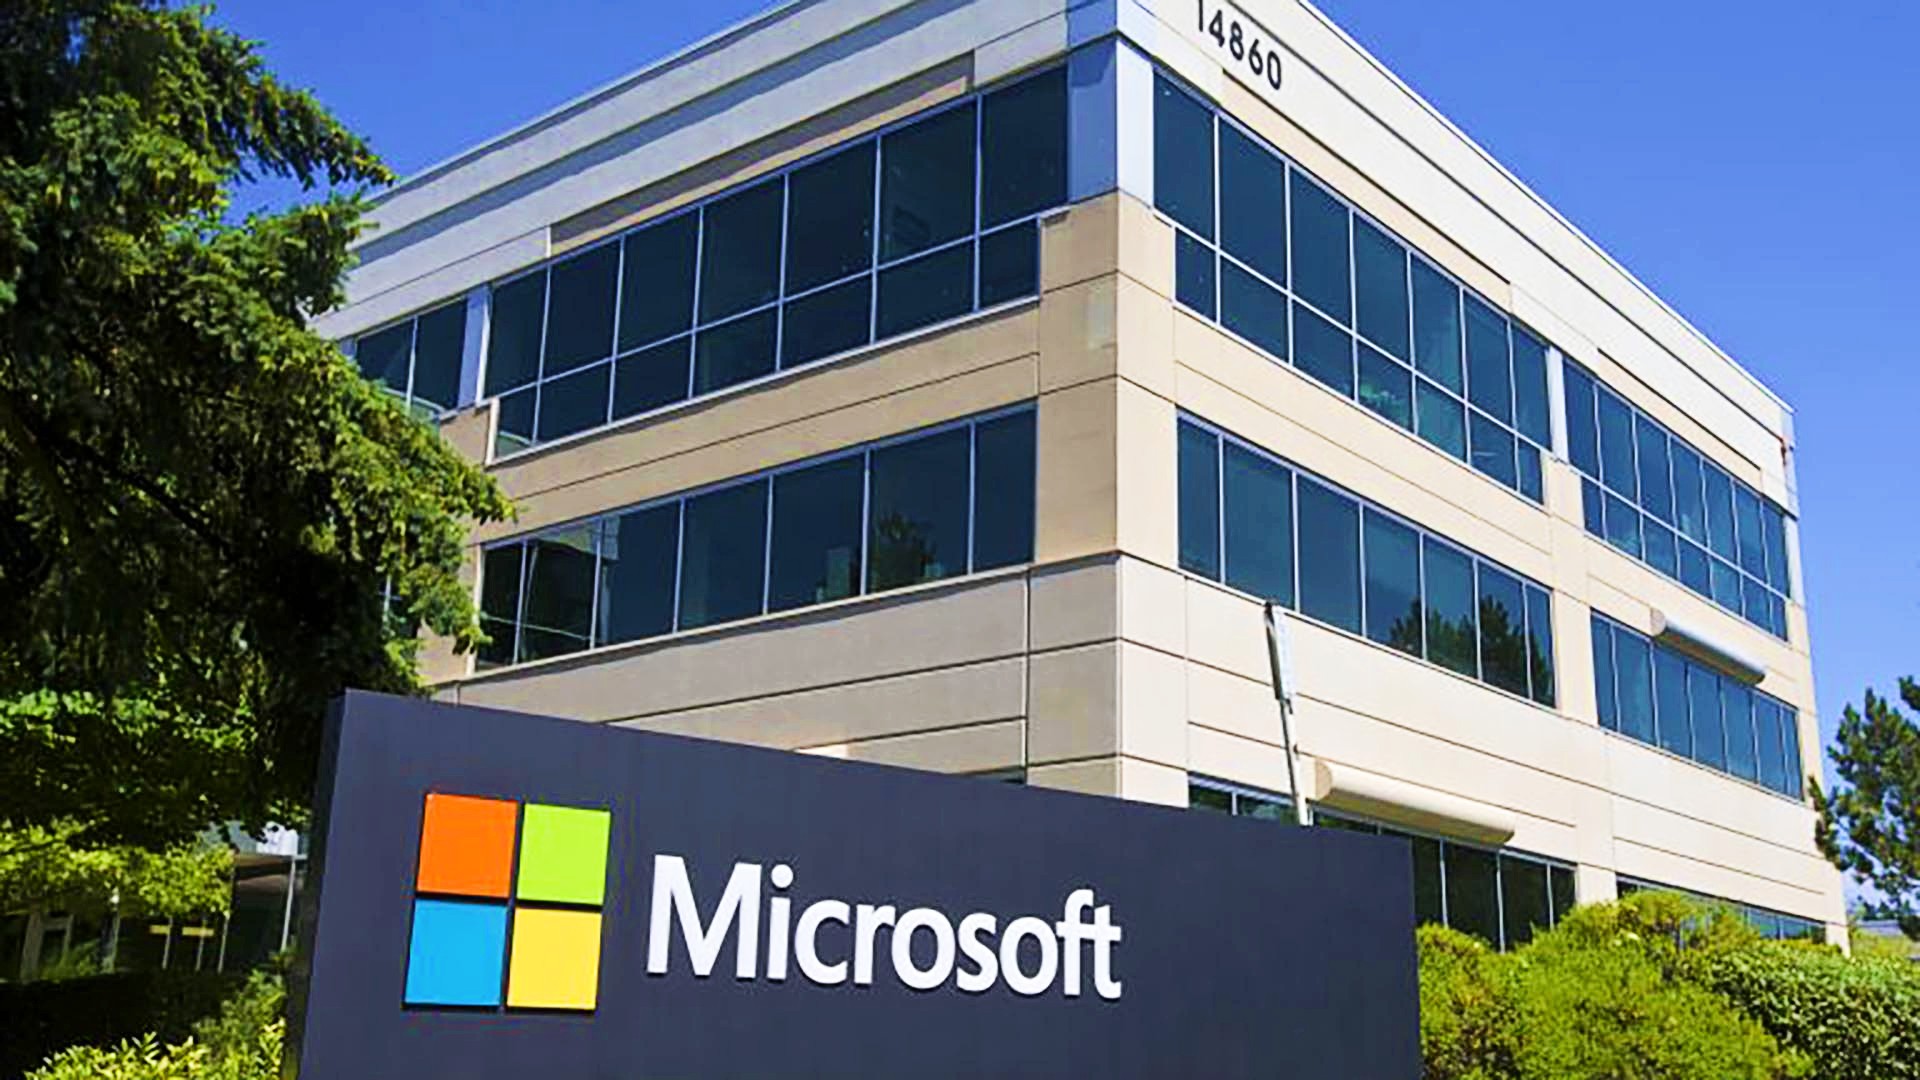 Microsoft execs accused of misconduct by dozens of staff